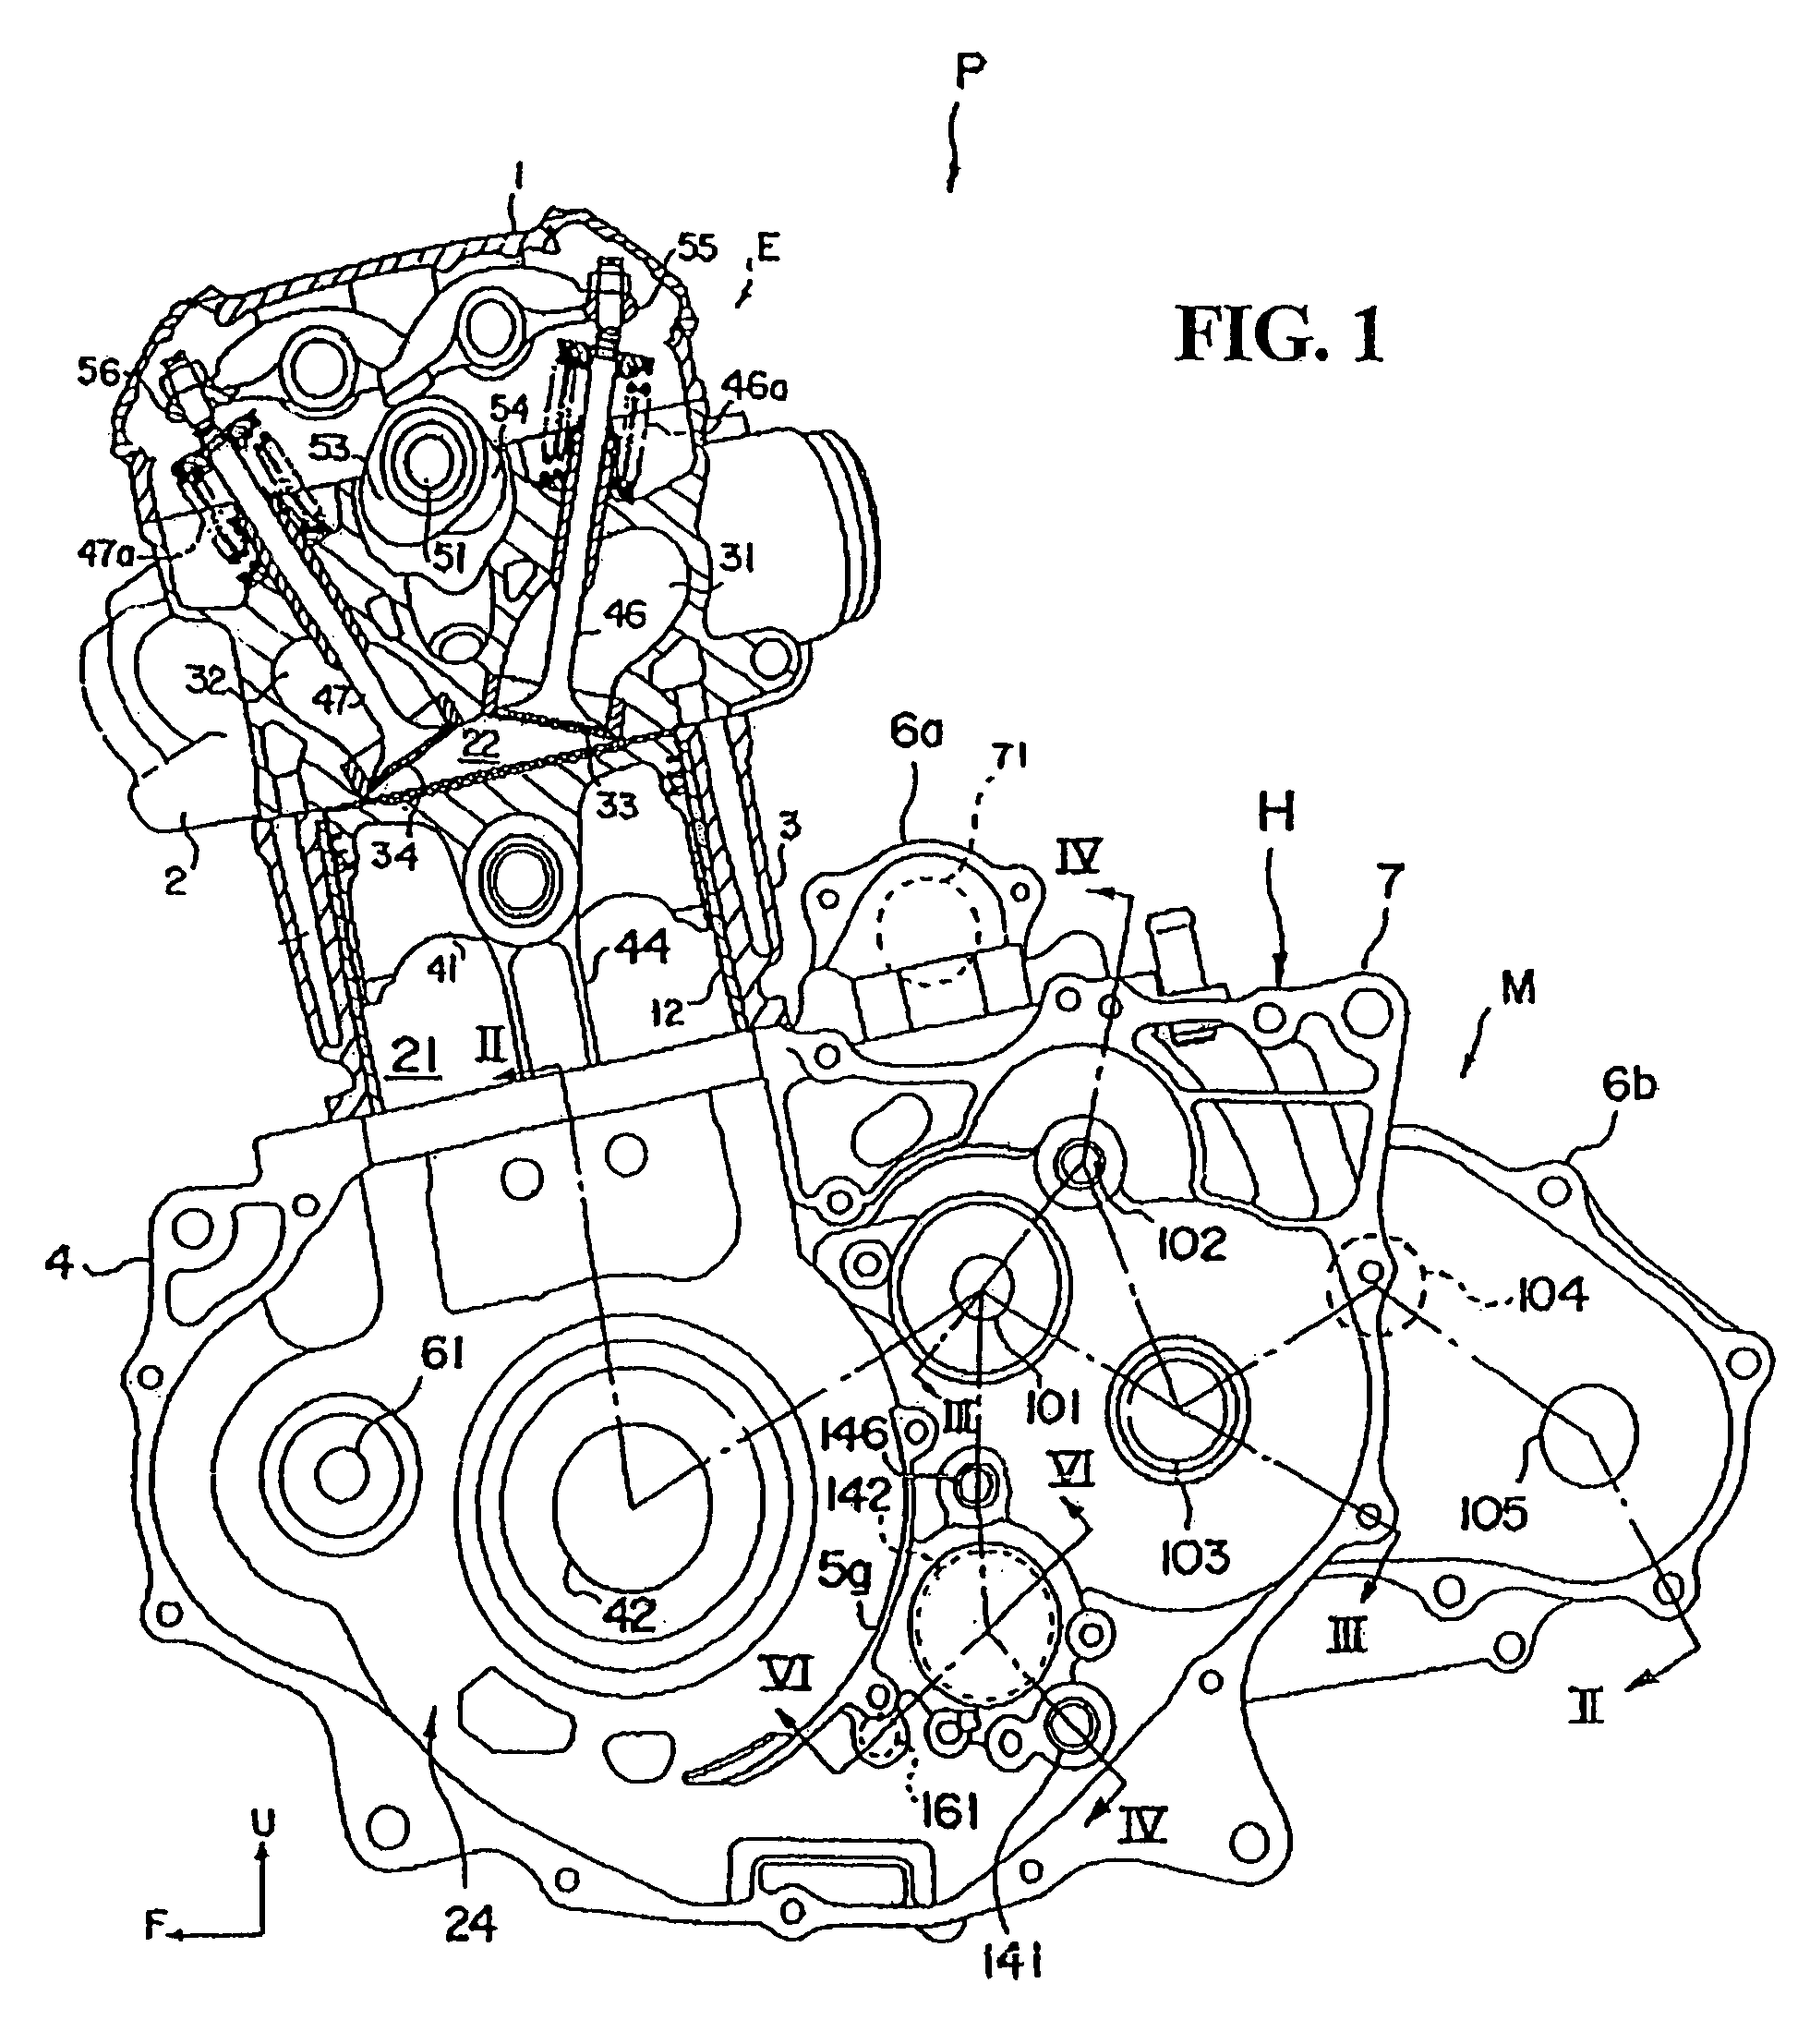 Vehicle power unit with improved lubrication oil recovery structure